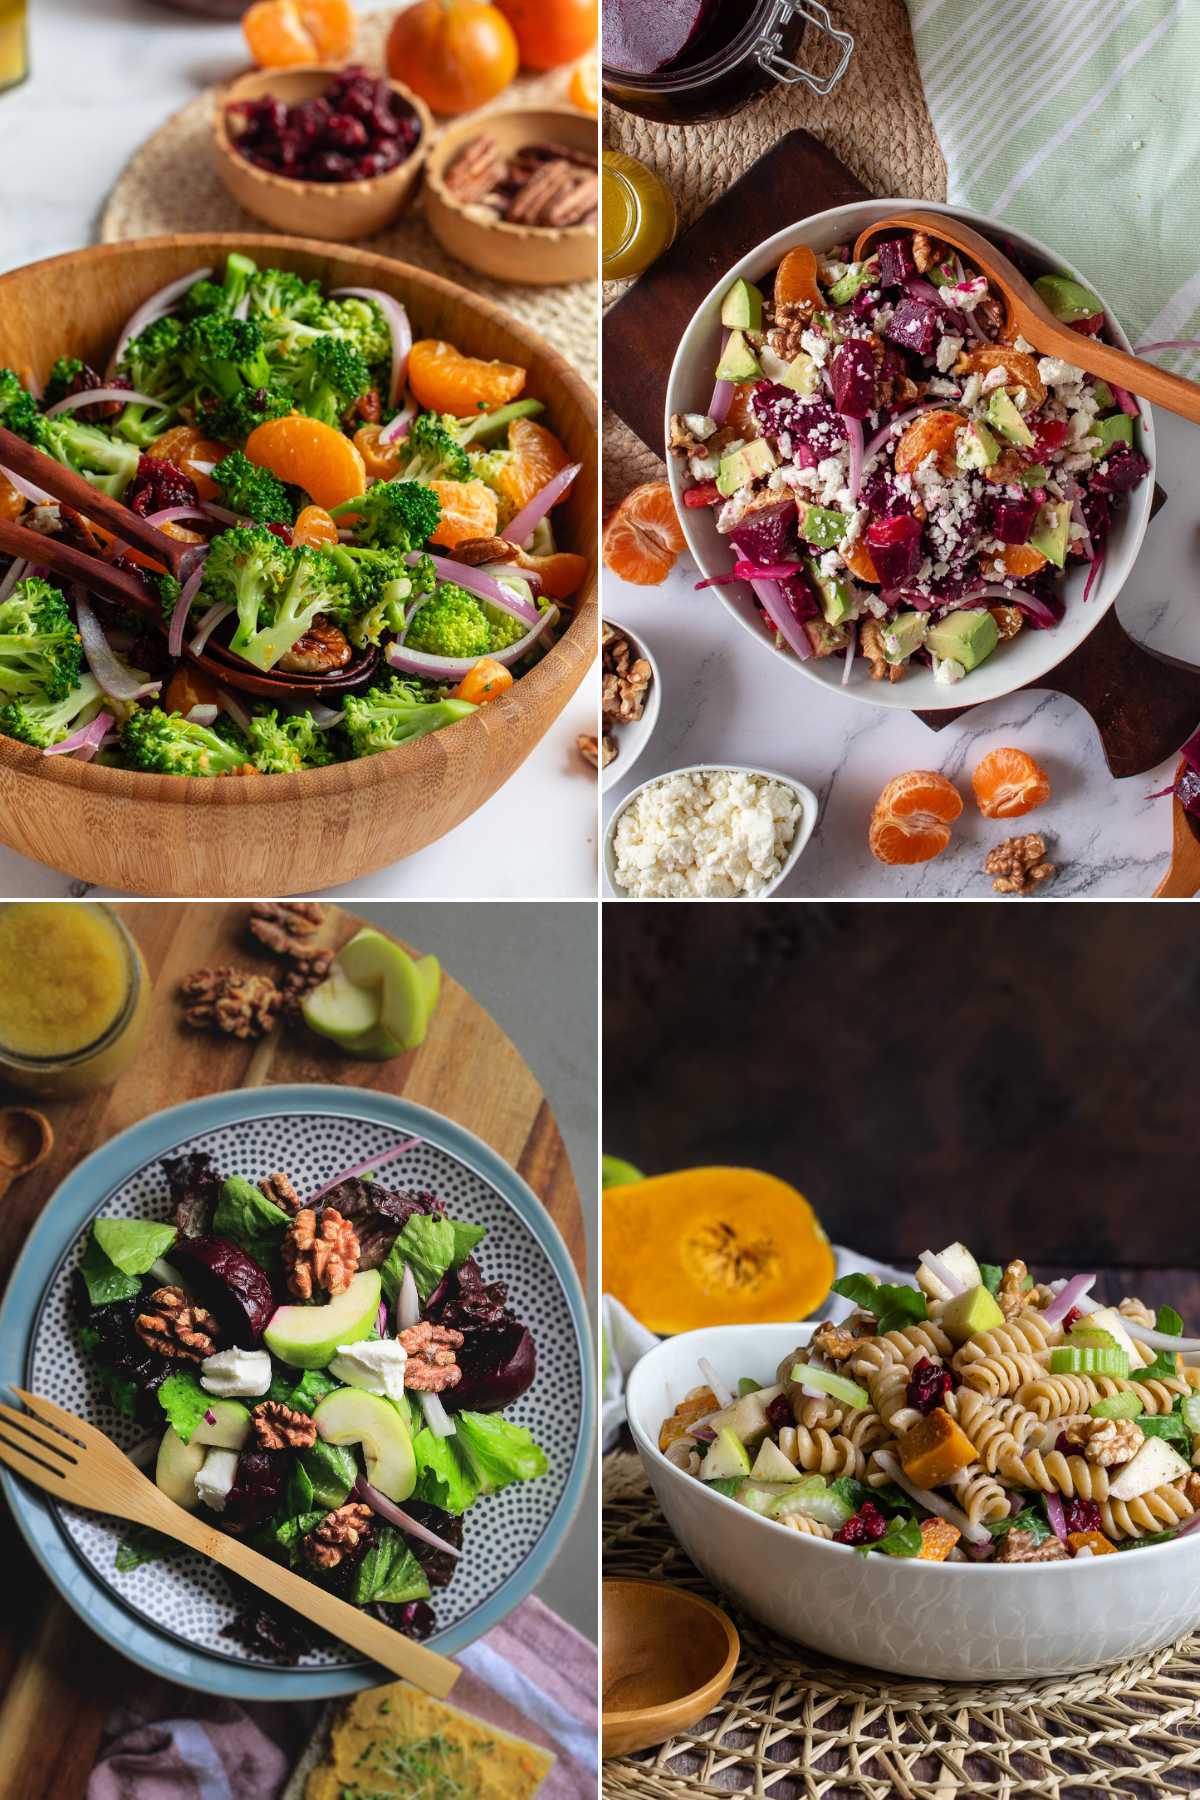 A collage of four holiday salads including broccoli salad, pickled beet salad, beet salad, and a fall pasta salad.